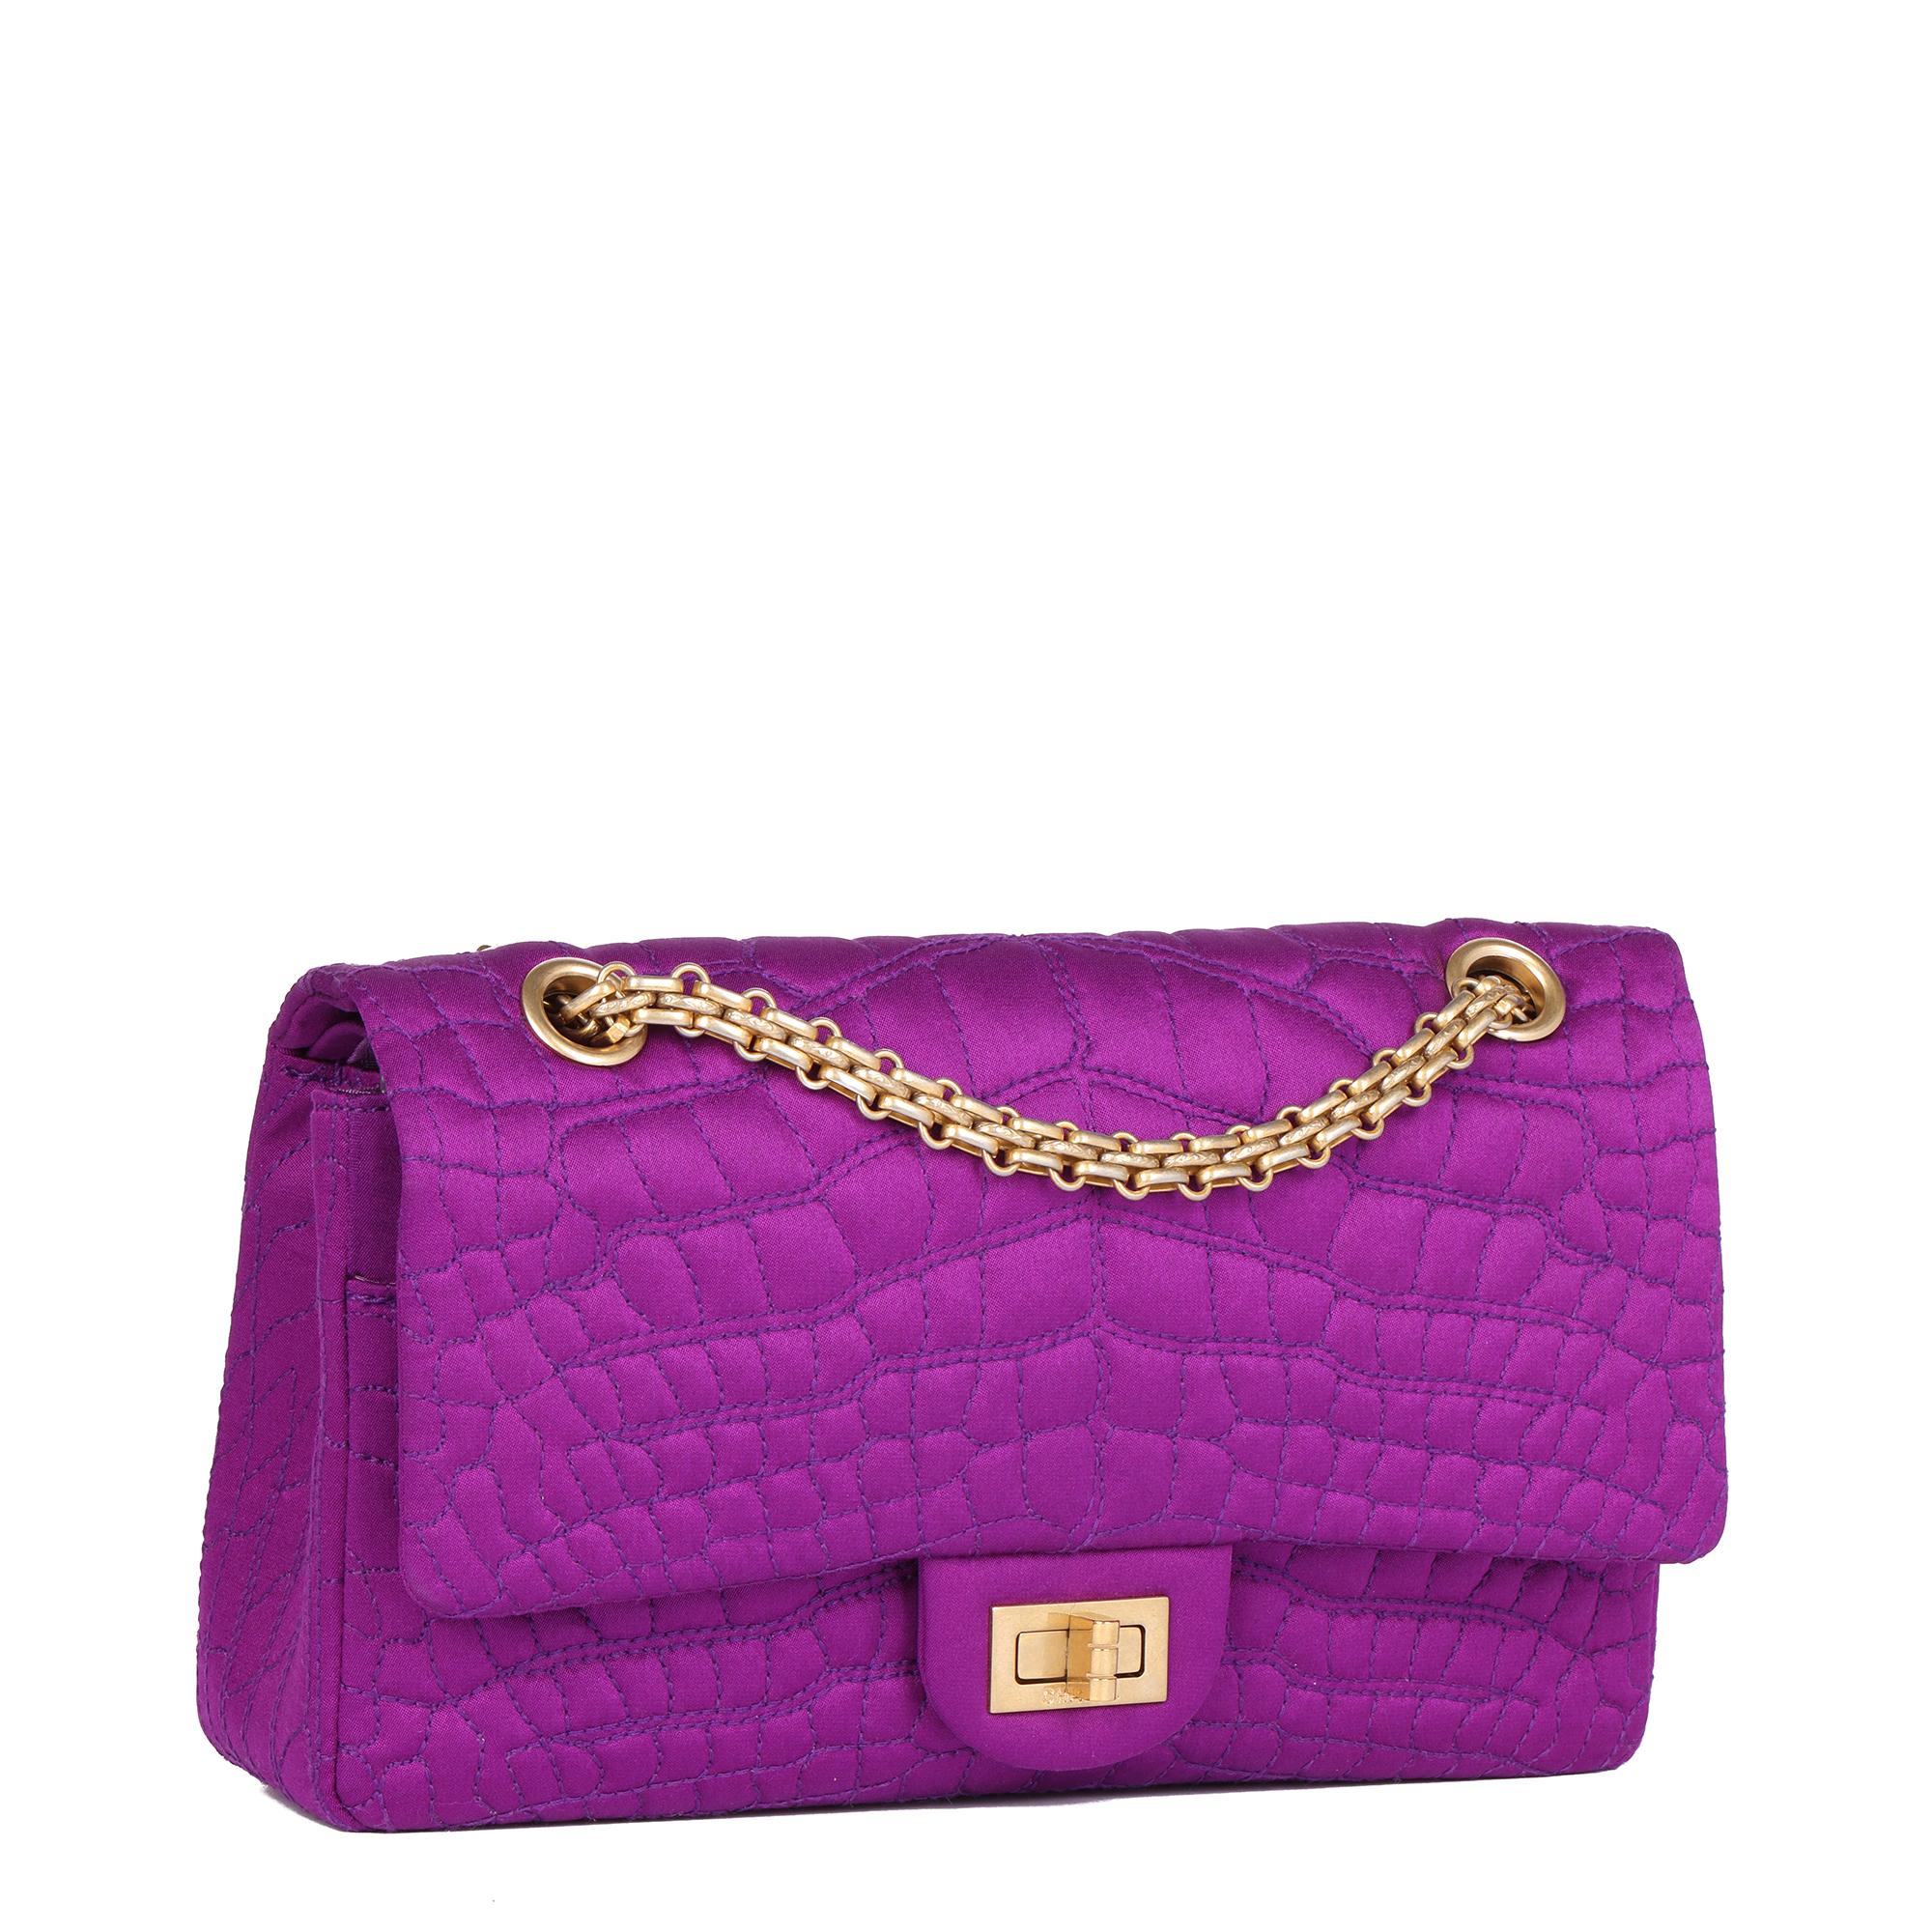 CHANEL
Purple Crocodile Embroidered Satin 2.55 224 Reissue Double Flap Bag

Xupes Reference: CB762
Serial Number: 11852329
Age (Circa): 2006
Accompanied By: Chanel Dust Bag, Authenticity Card
Authenticity Details: Authenticity Card, Serial Sticker